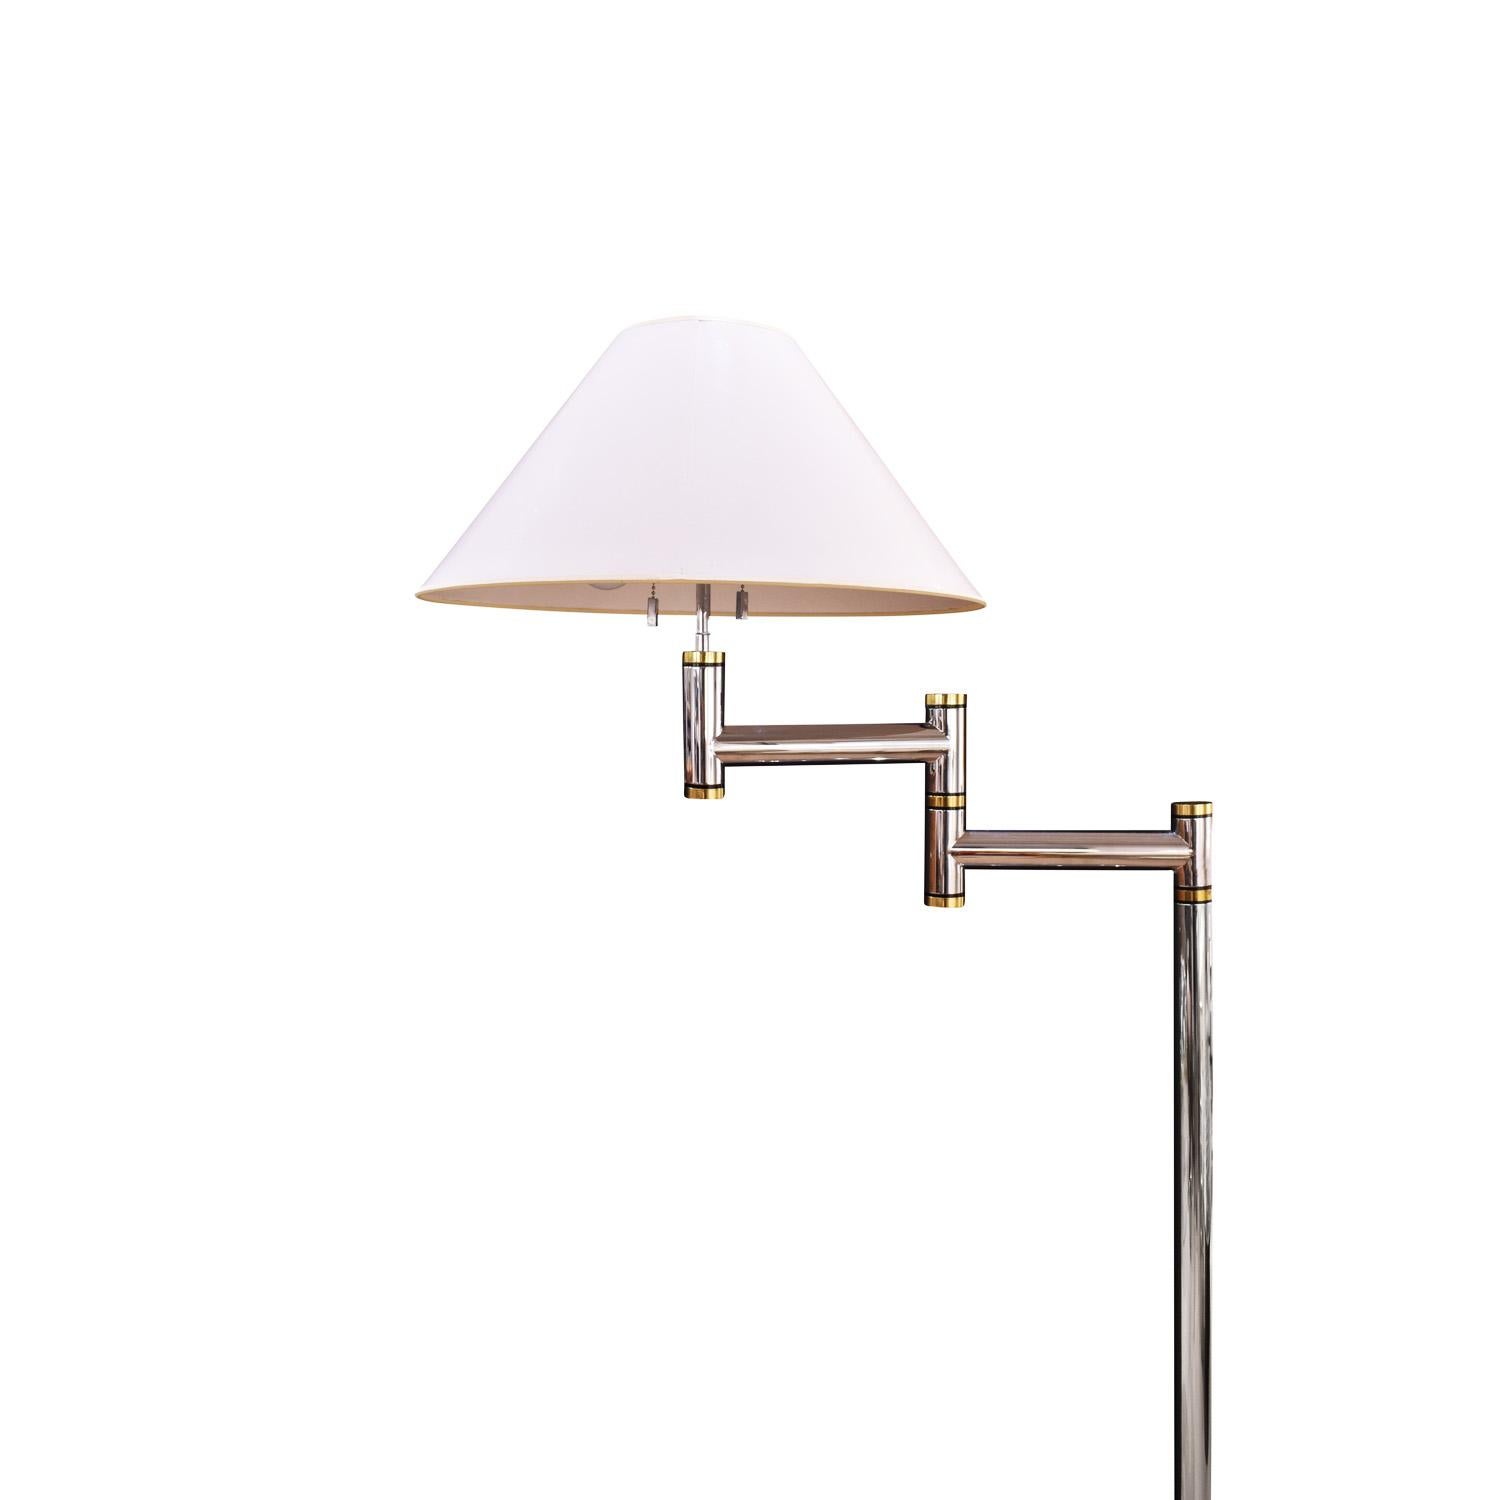 Meticulously crafted swing-arm floor lamp in polished chrome and brass by Karl Springer, American 1980's. This listing is for 1 lamp; 1 has sold. The quality of construction of these lamps is incredible. With original white lacquered shade.

For